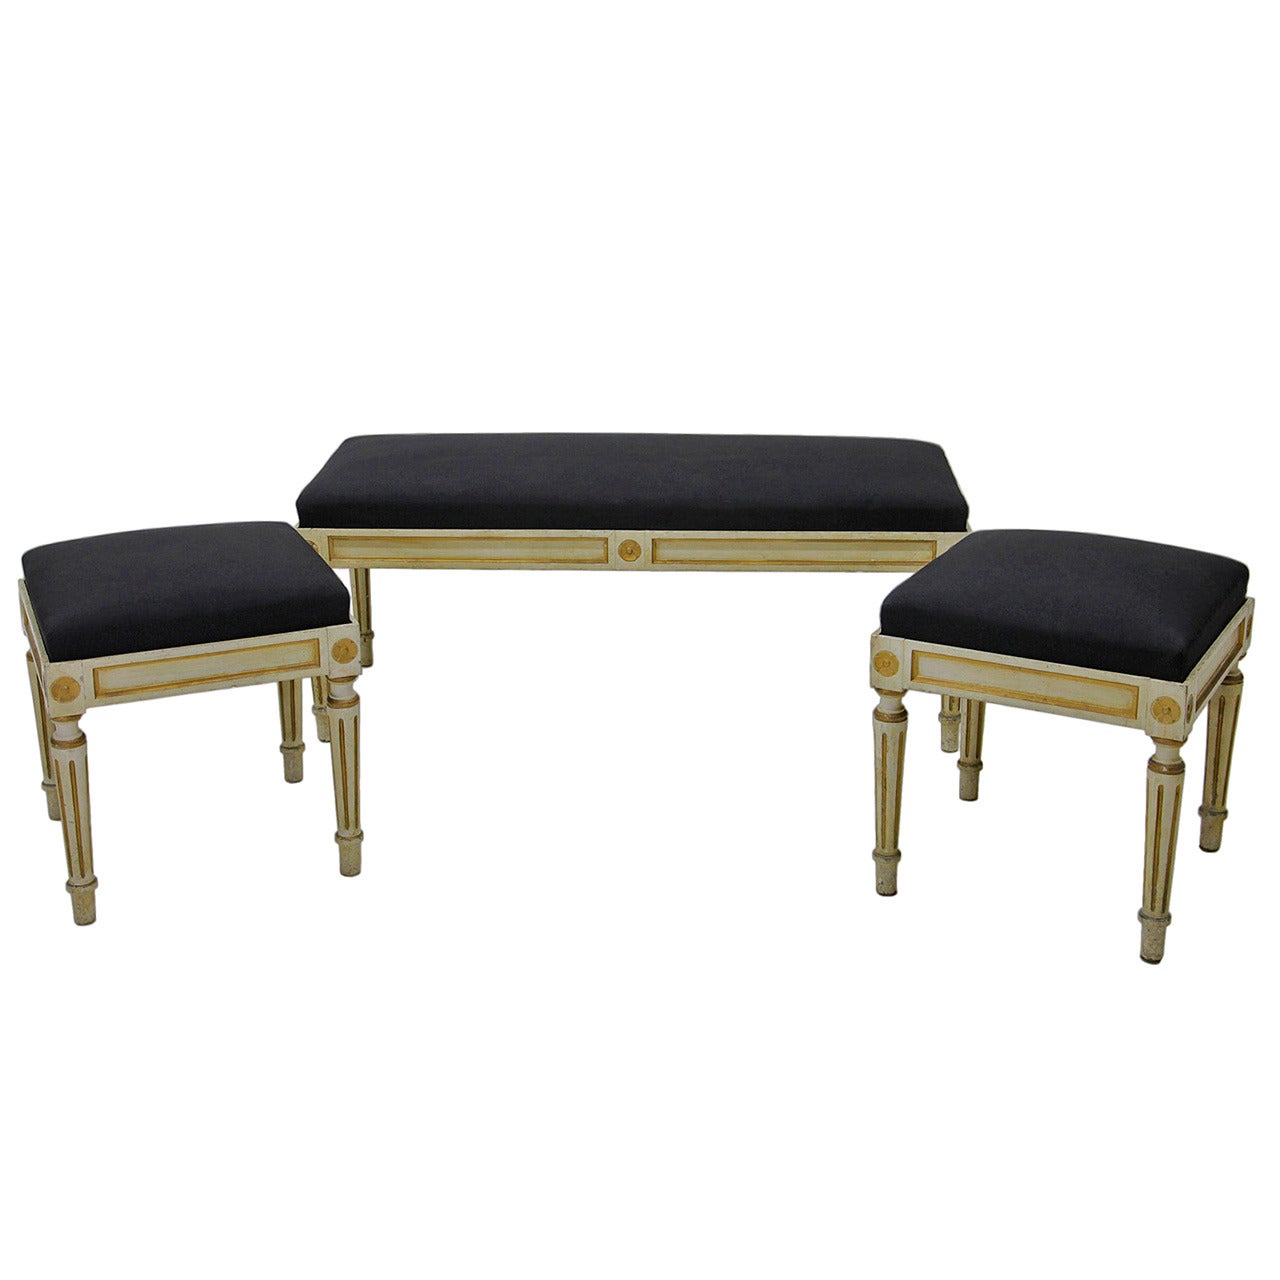 Wonderful Pair of French Stools and Bench In Louis-Seize Style